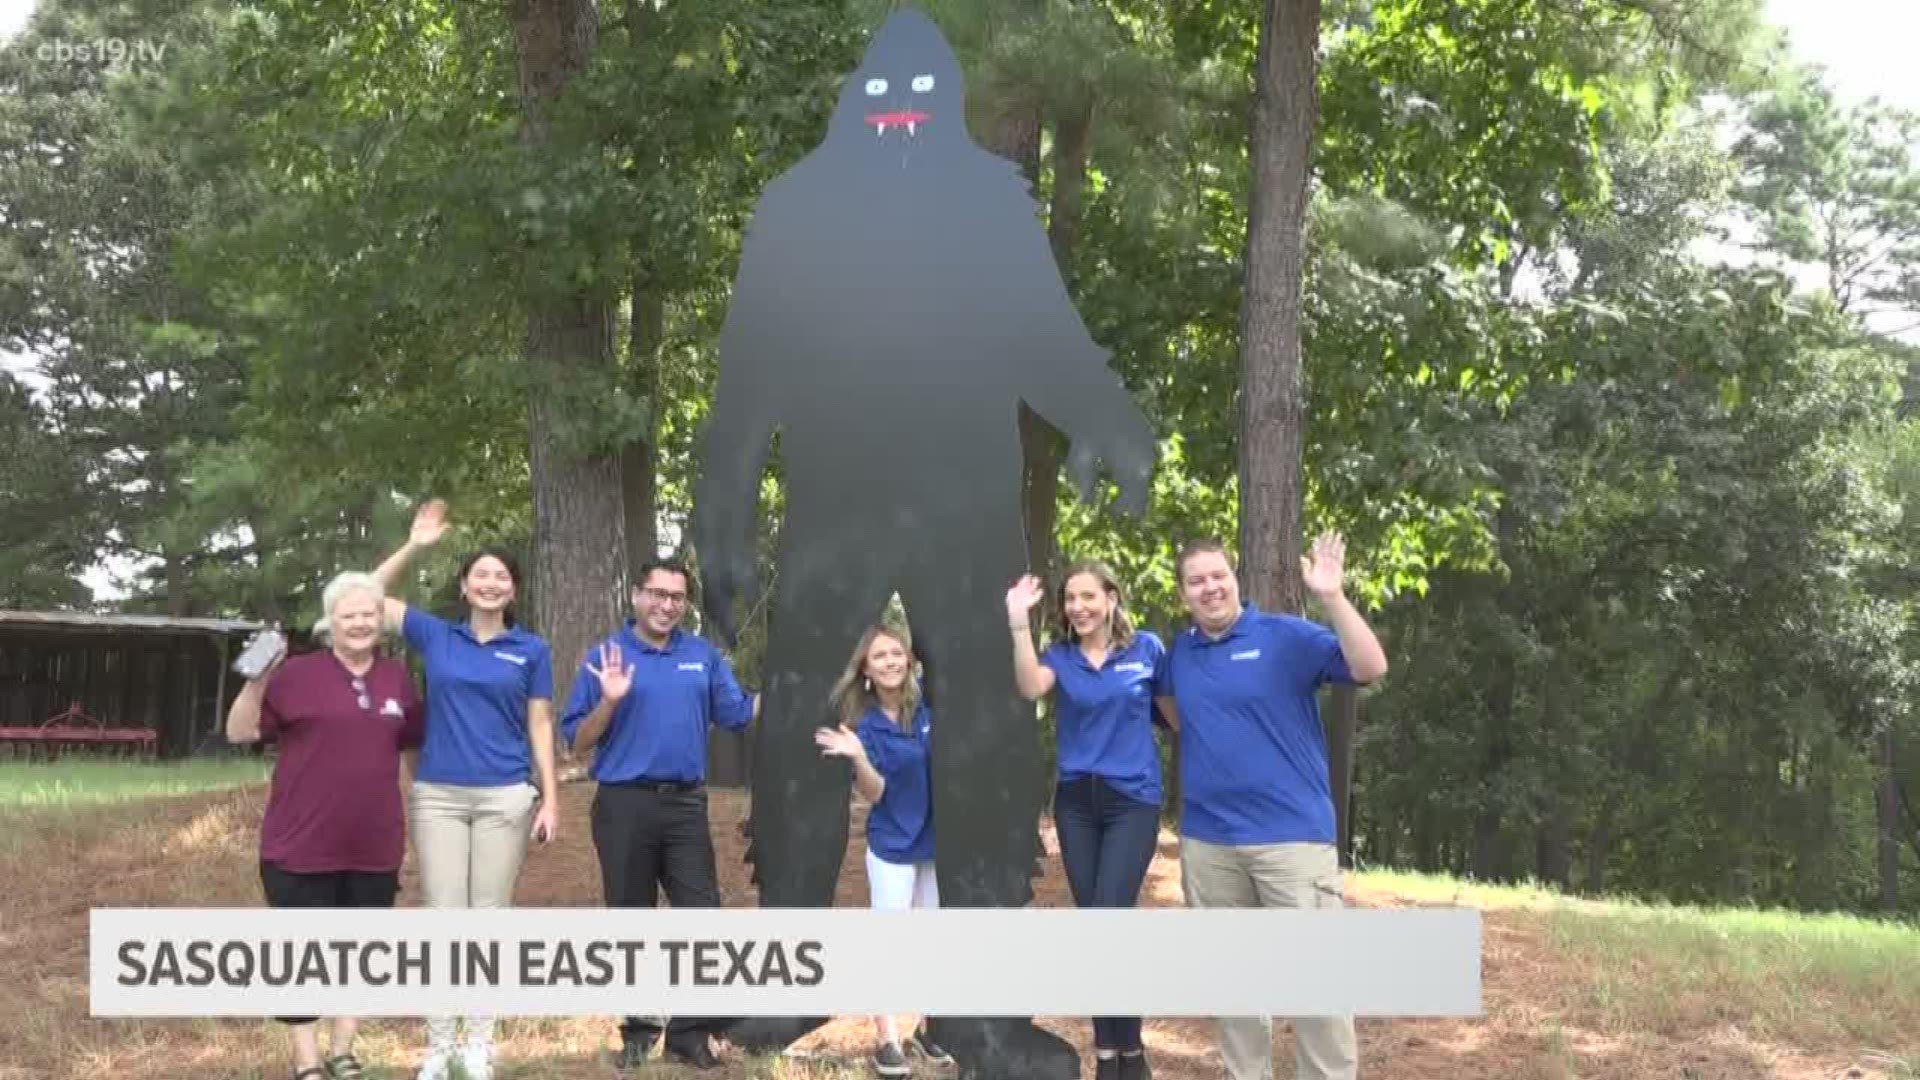 There's a sasquatch in East Texas! The Morning Loop team traveled to Overton to meet him. Check it out. 